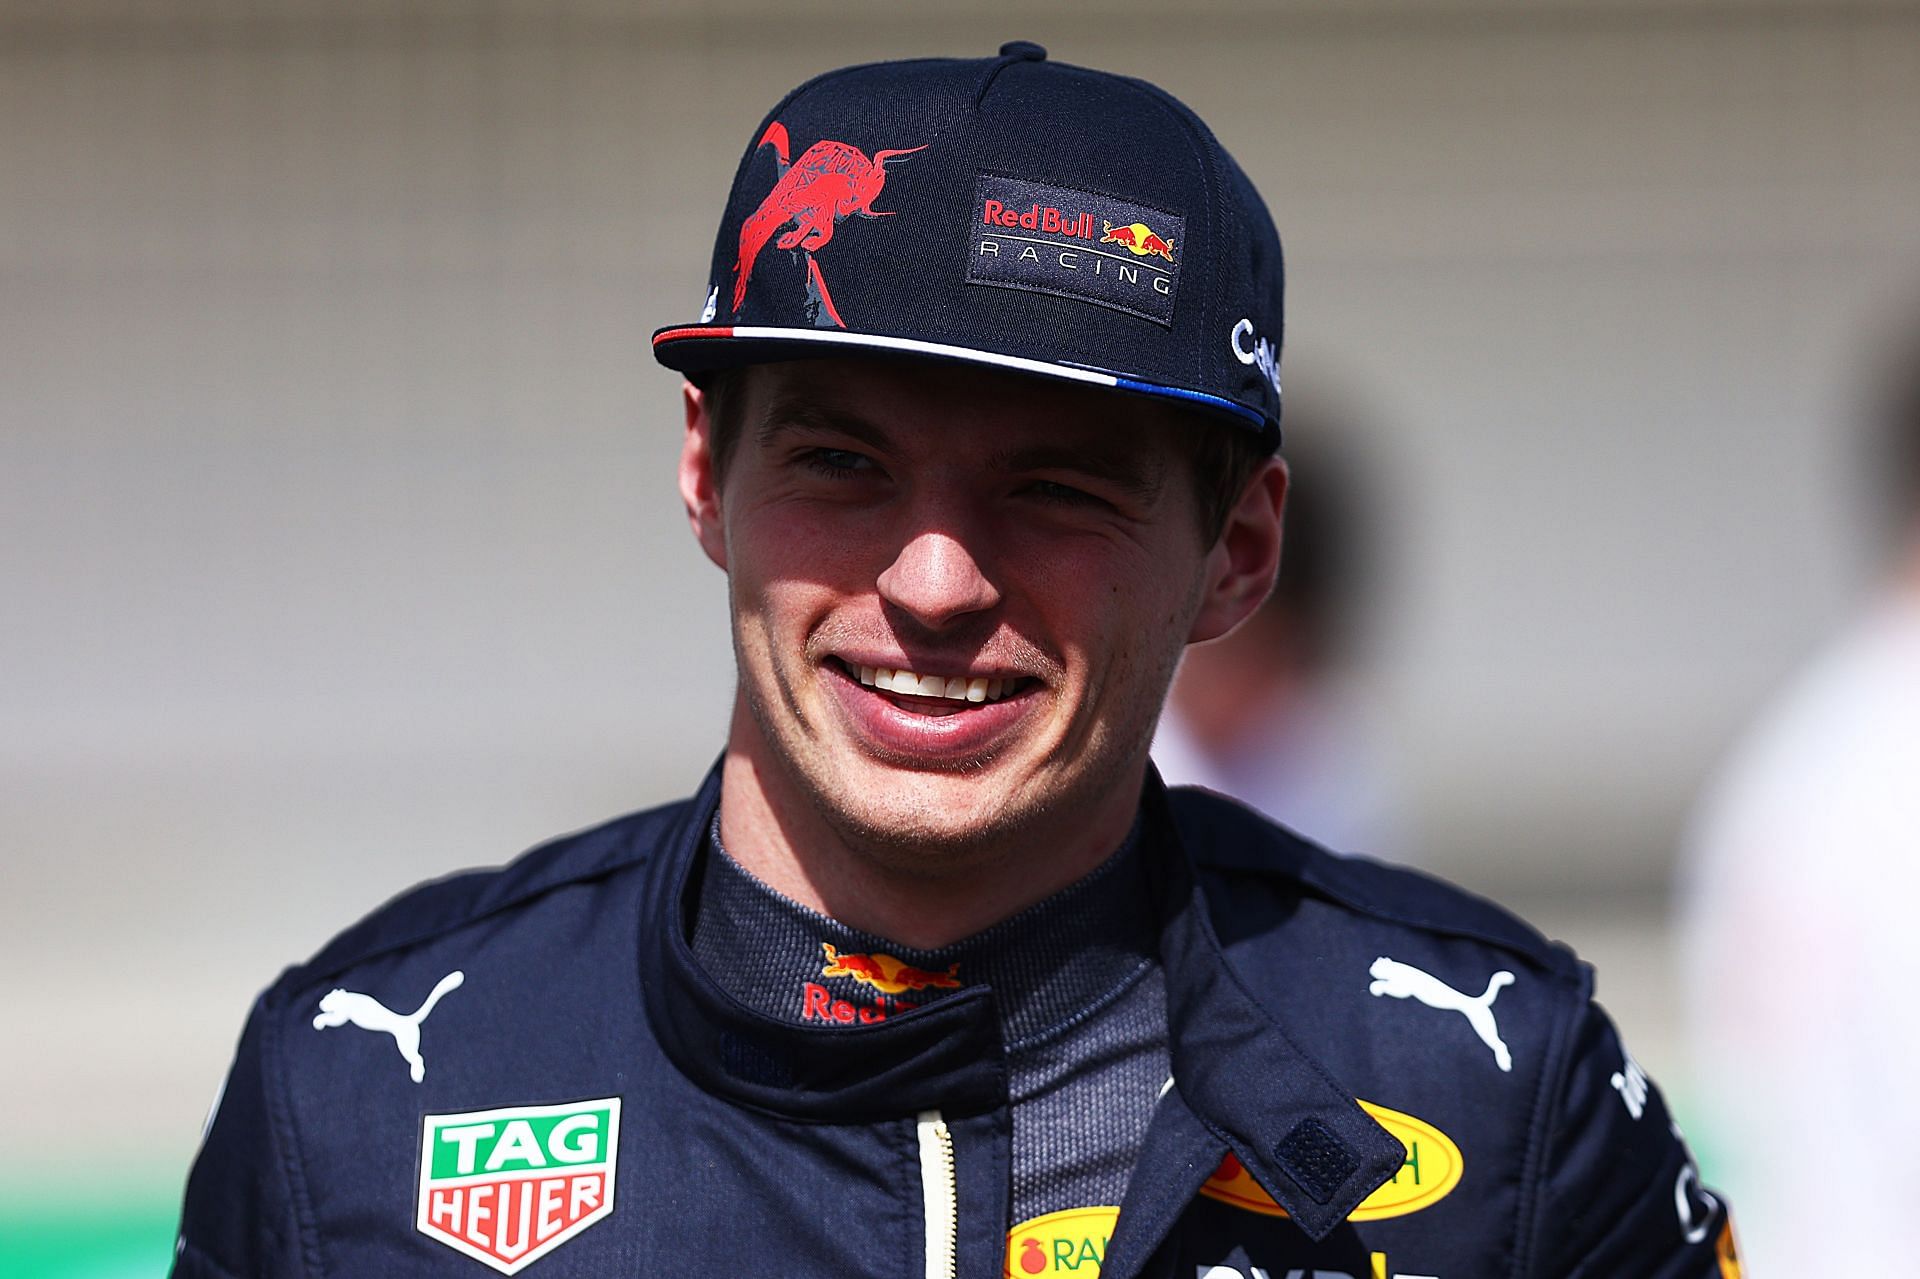 Max Verstappen looks on during Day 1 of F1 Testing in Bahrain (Photo by Lars Baron/Getty Images)